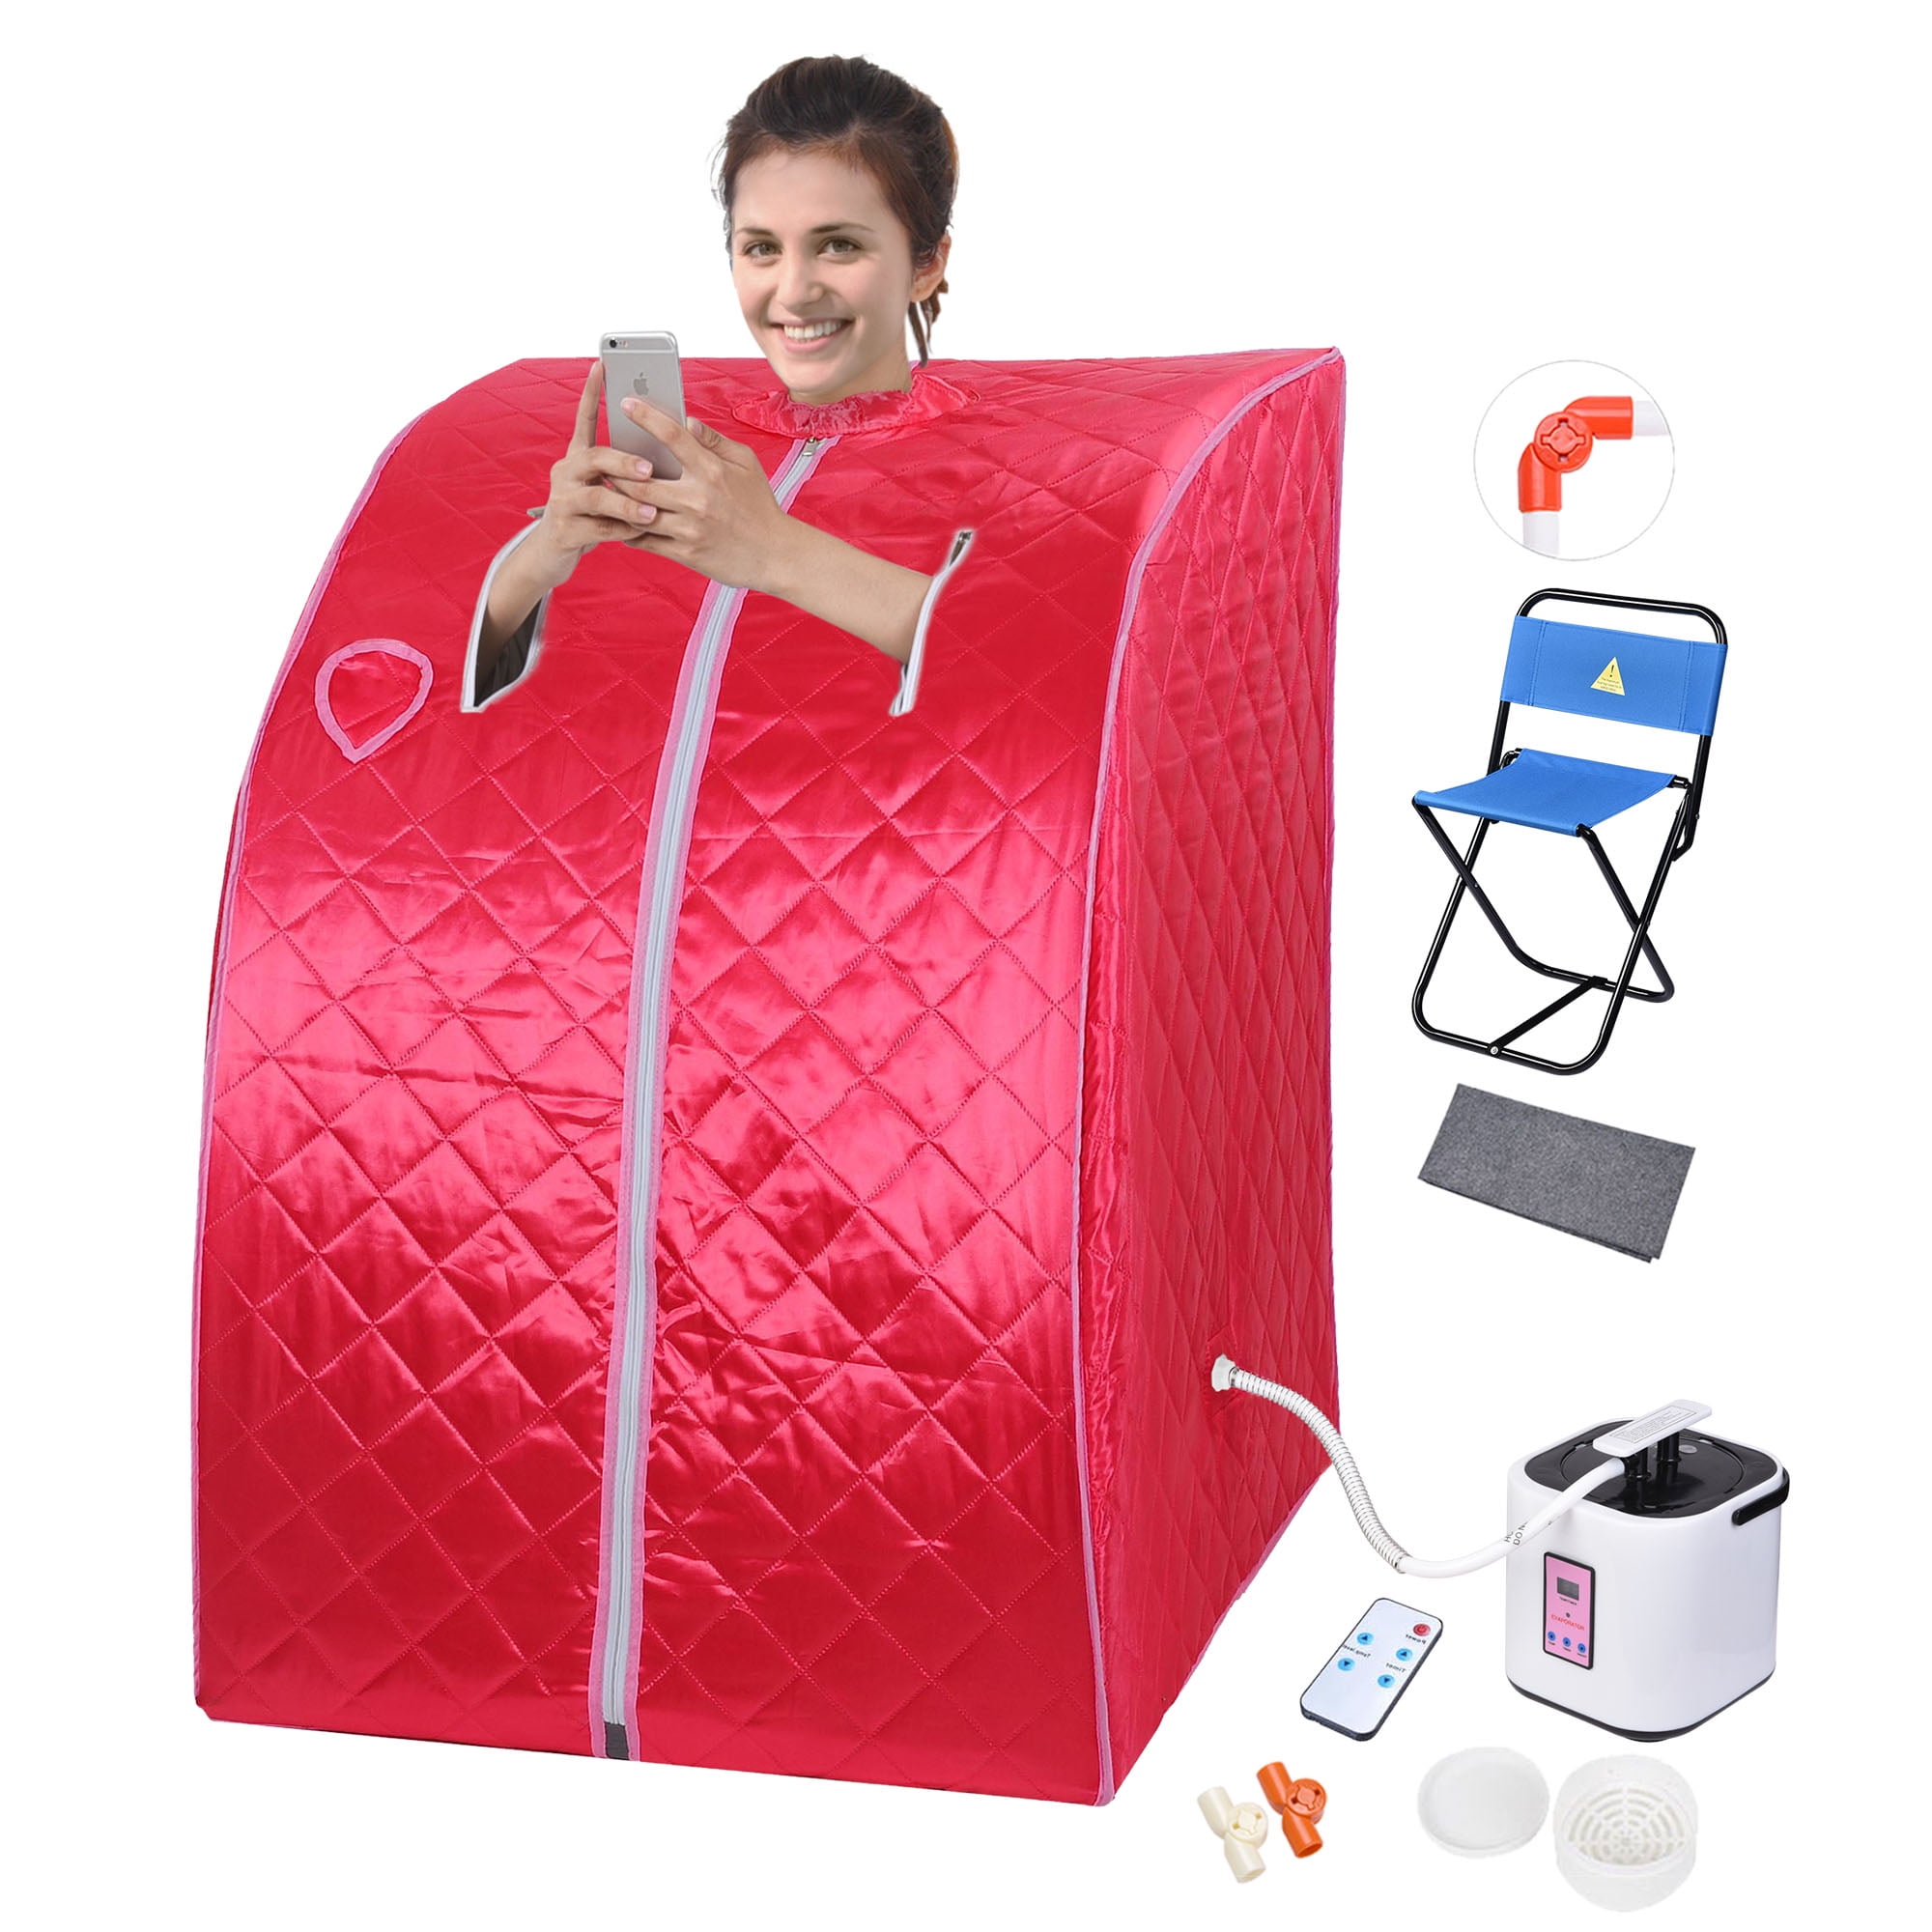 AnMoreH Portable Steam Sauna Spa Foldable Chair 2L Personal Therapeutic Sauna for Relaxation Home Sauna Spa Tent with Remote Control Timer 